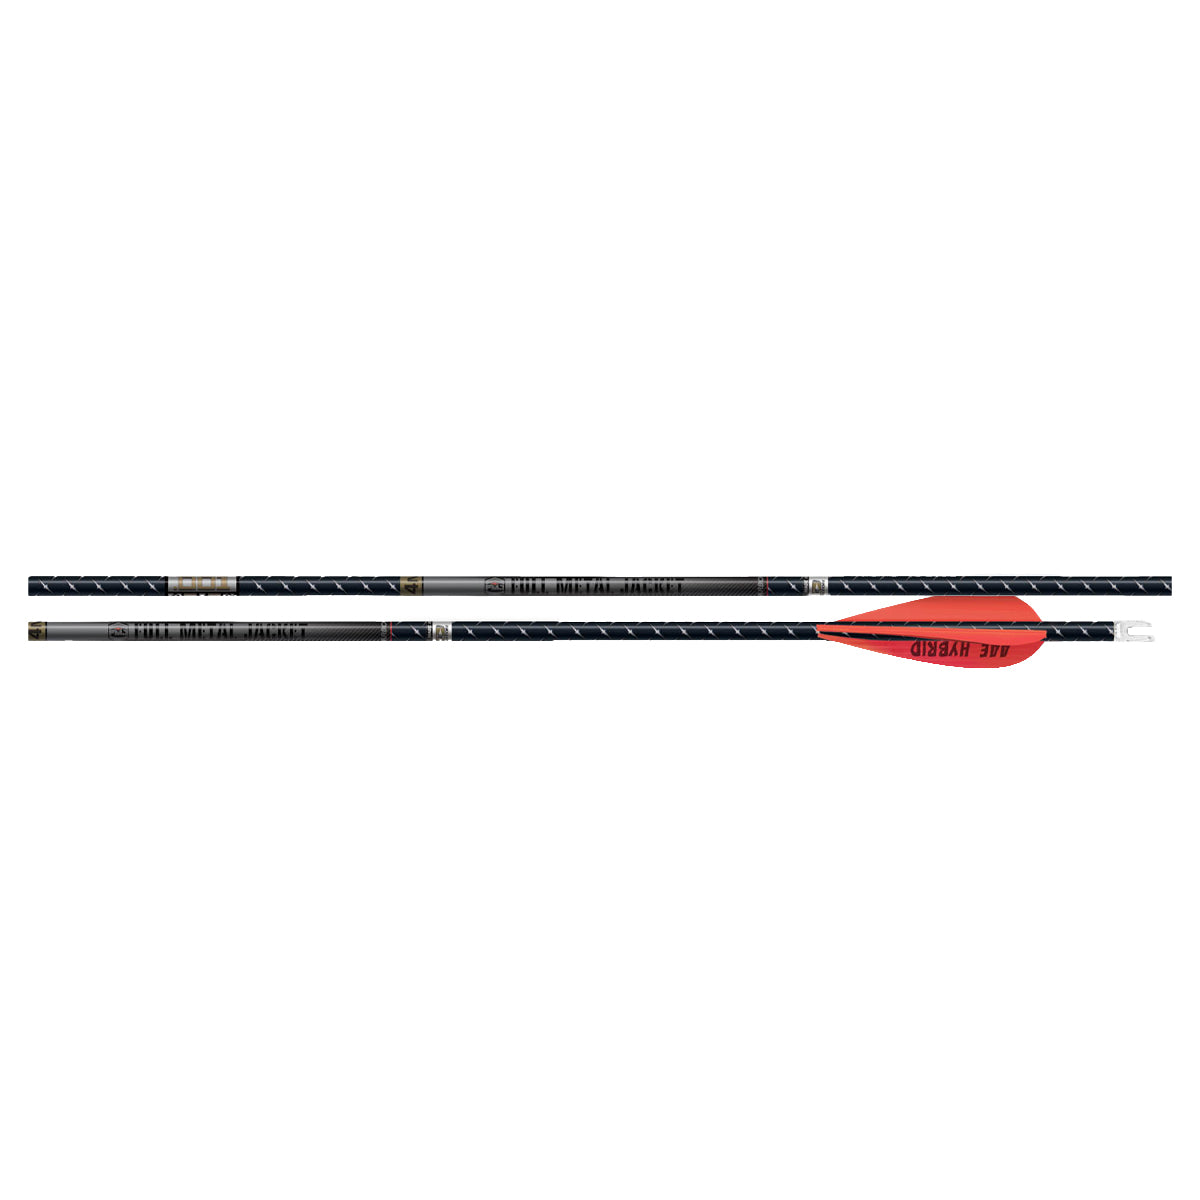 Easton FMJ 4MM Match Grade Pro Shop Series Pre-Fletched Arrow Shafts - 6 Count in  by GOHUNT | Easton - GOHUNT Shop